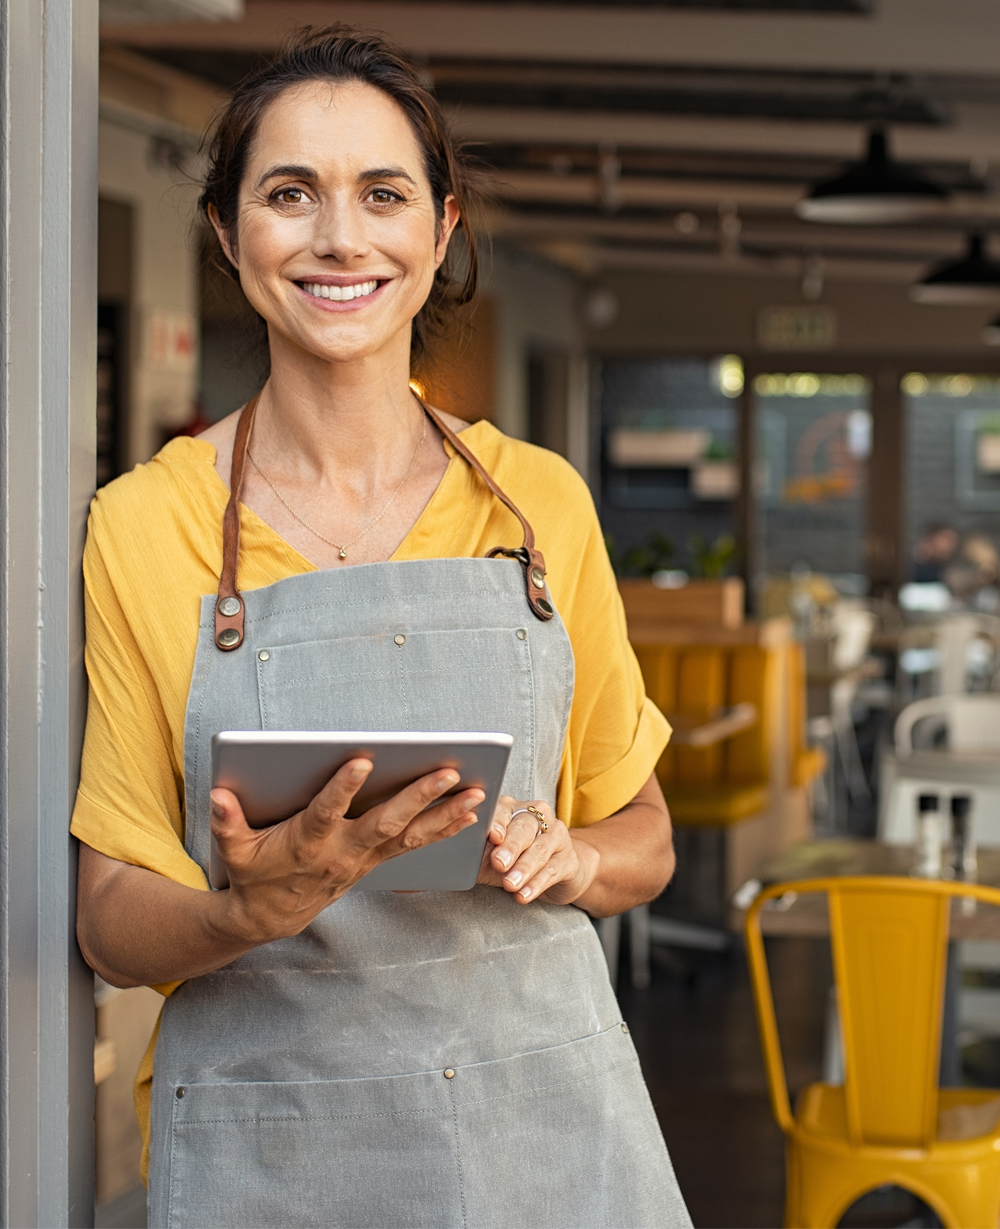 Business owner wearing a yellow apron, standing in front of business.